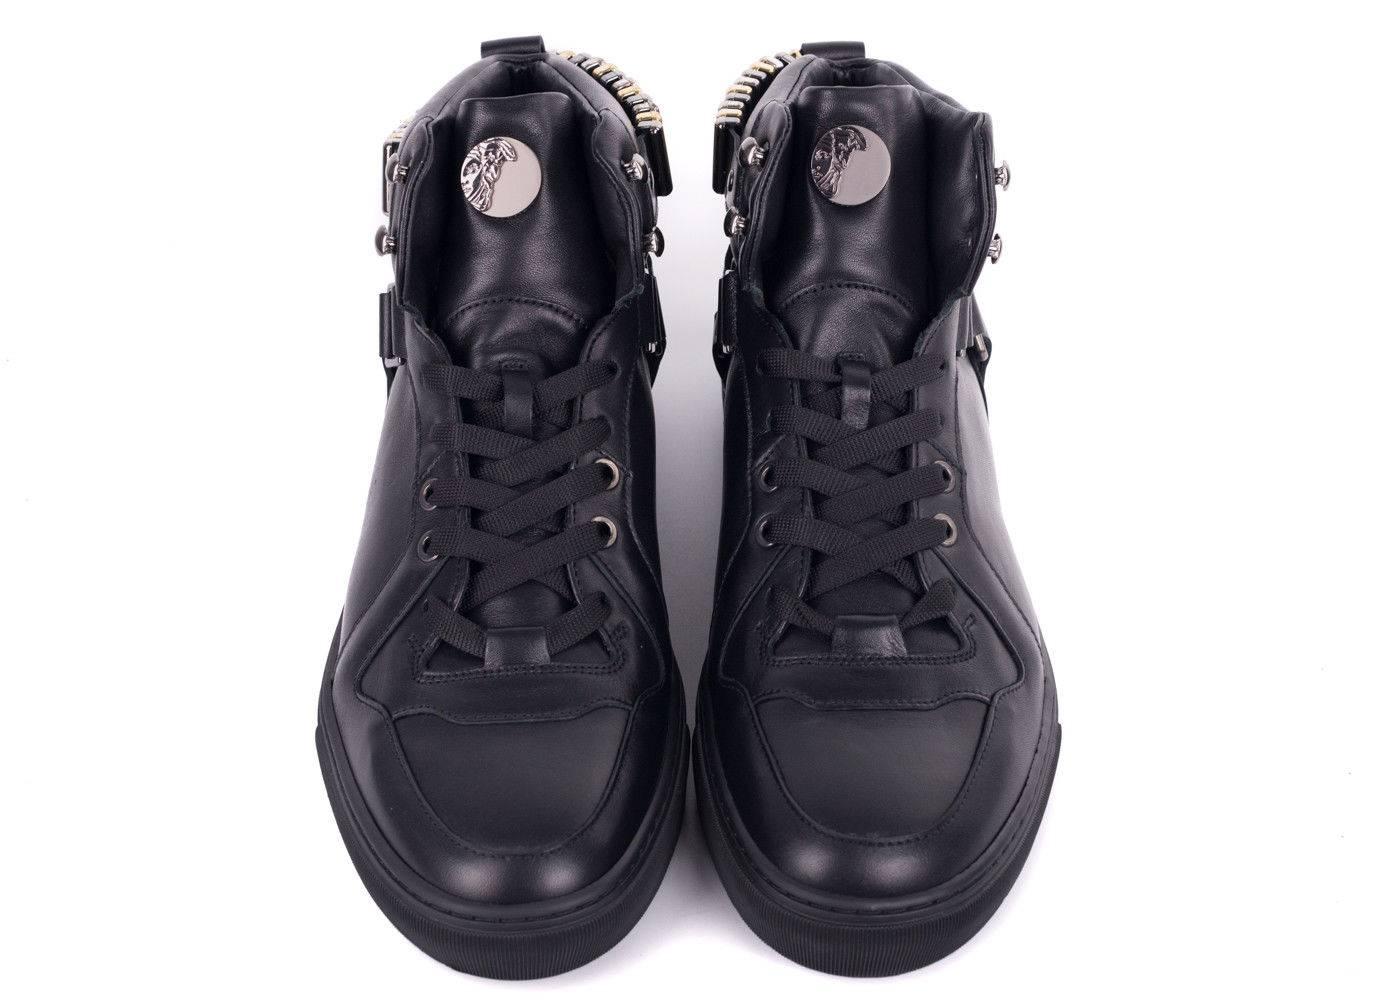 Versace's Hi Top Harness Sneaker took a futuristic turn for your best. This sneaker features it's signature leather strap harness, edgy gunmetal and gold rivets strap, and smooth polished finish. You can pair these shoes will an all black outfit to